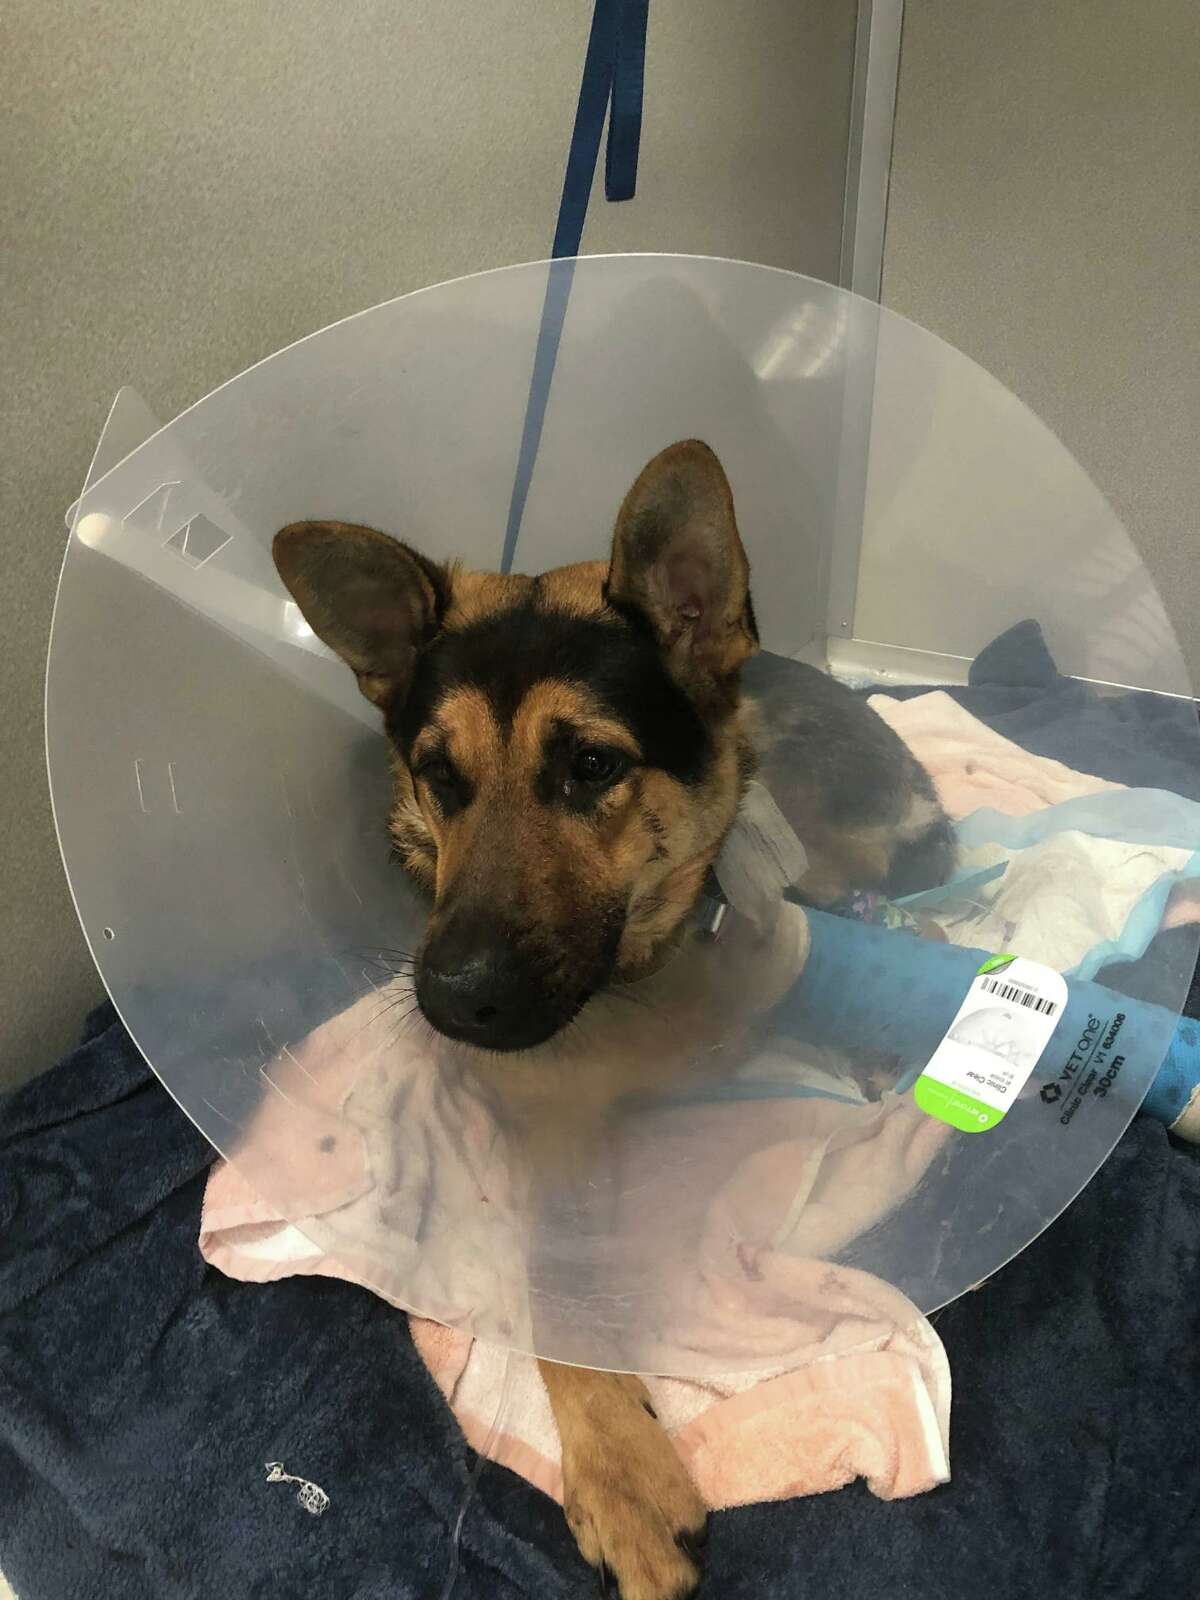 The dog — described by police as black and brown and likely 8 months old to 2 years old — was taken to a local veterinarian for treatment after being found with two gunshot wounds. Police said one of the bullets shattered his leg, while the other is embedded in his shoulder.